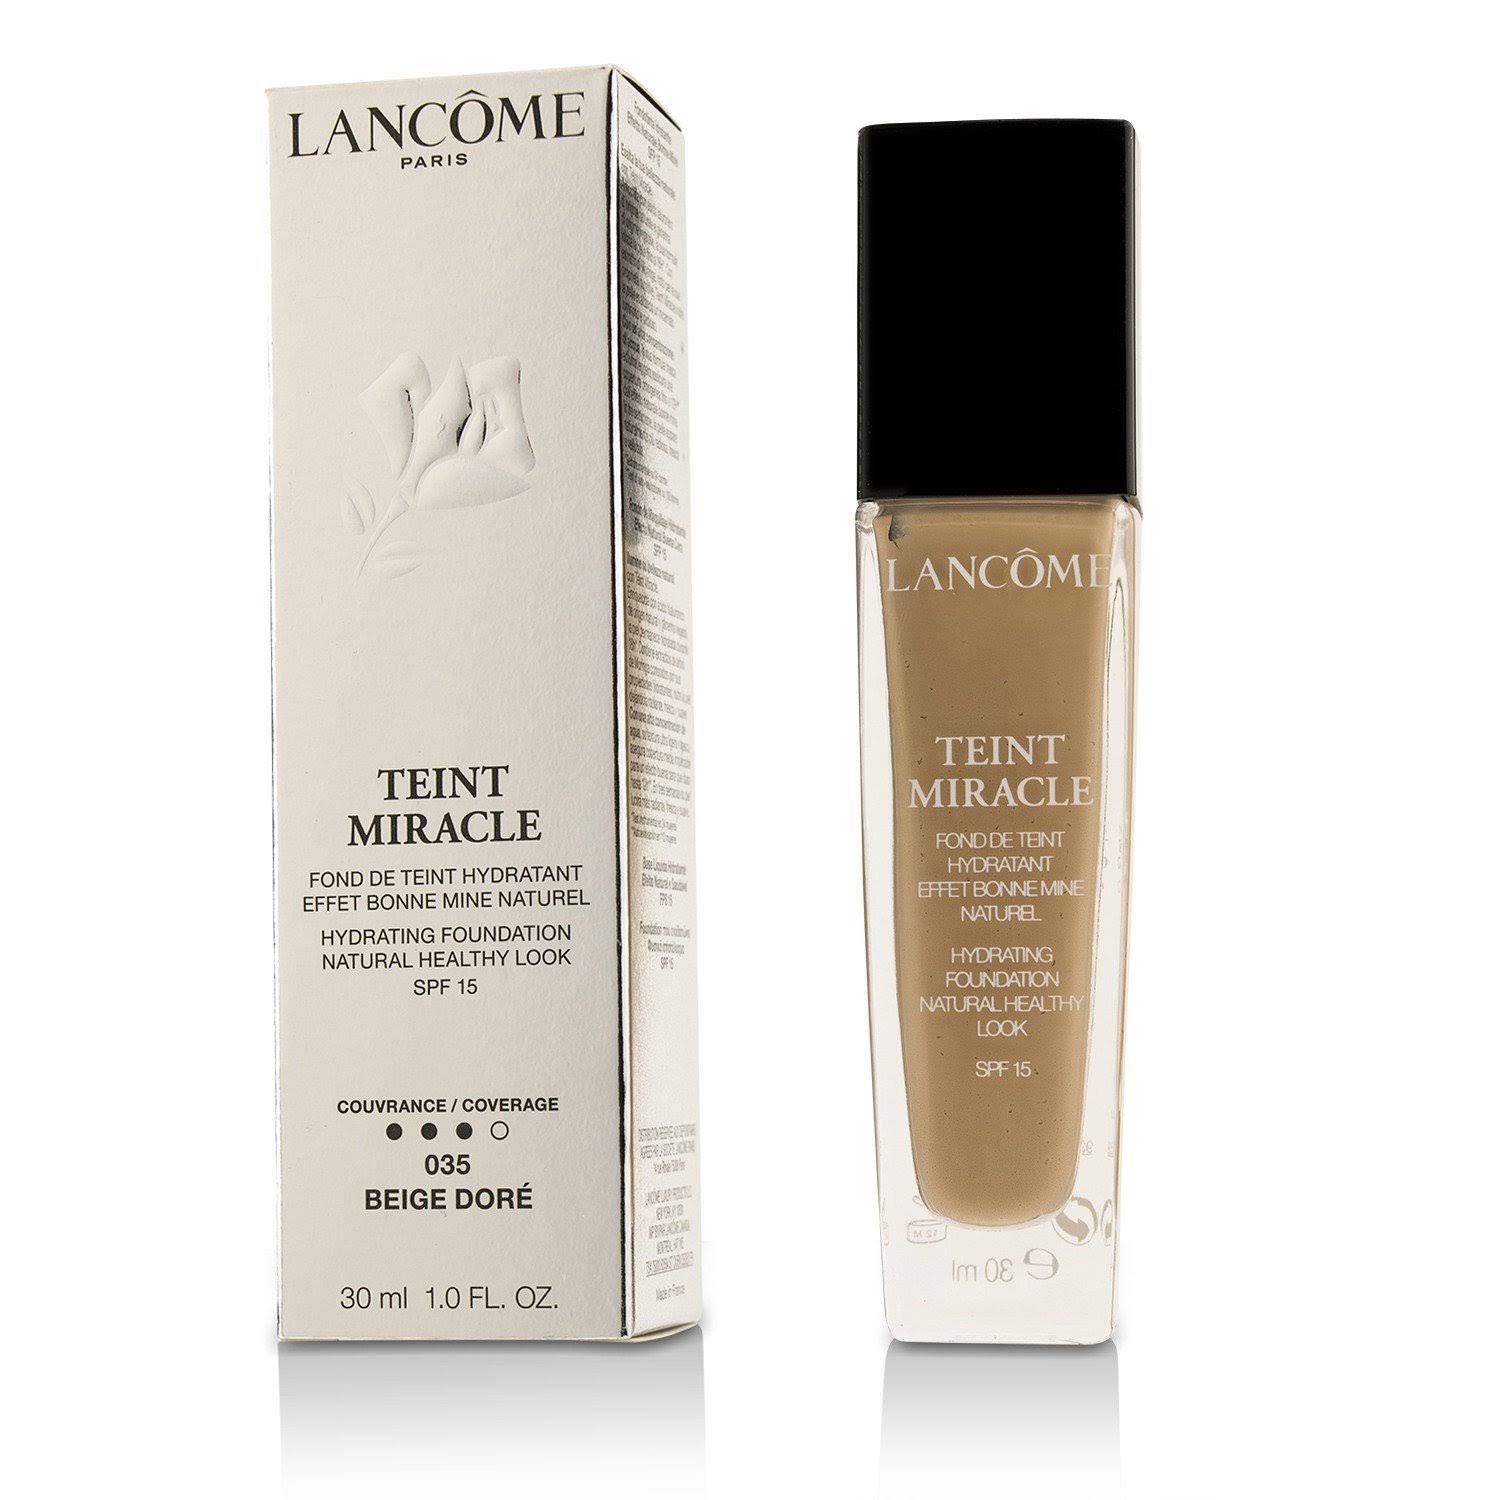 Lancome Teint Miracle Hydrating Foundation - #035 Beige Dore, 30ml